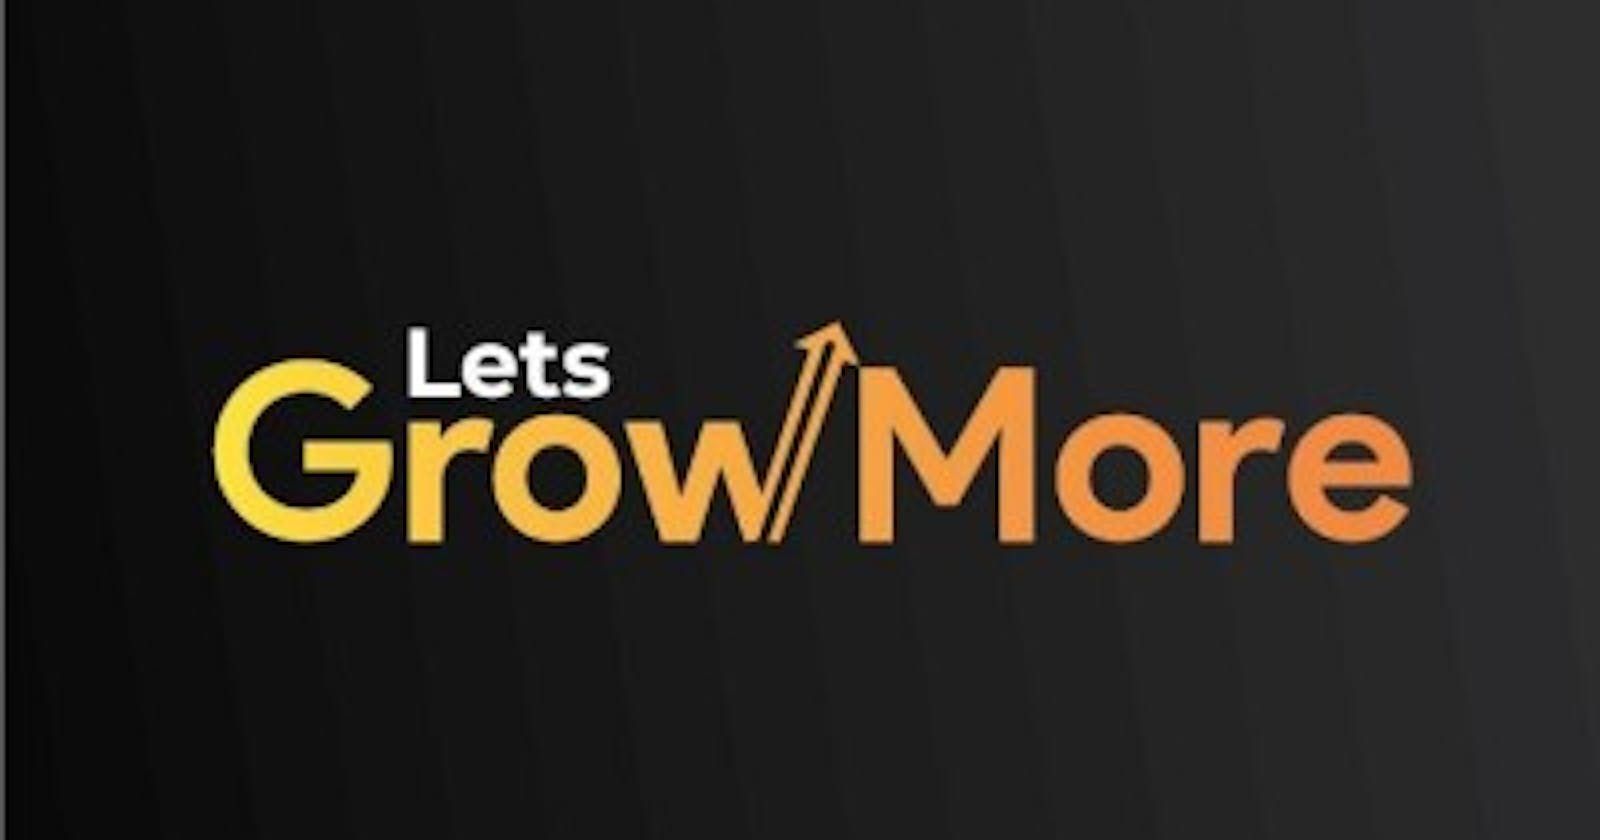 My Internship Experience at Lets Grow More